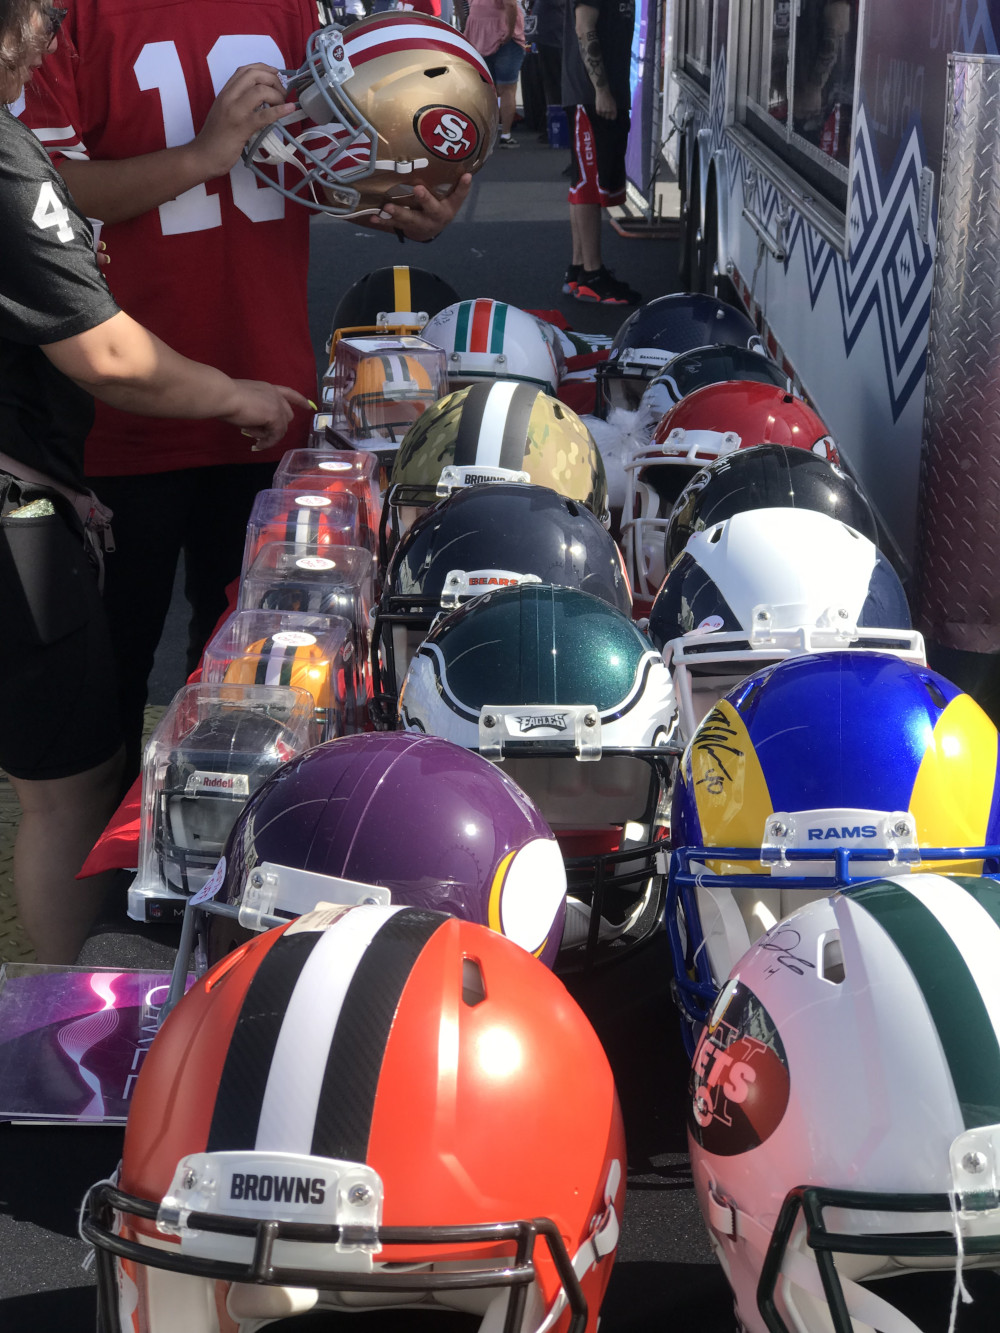 NFL Draft Experience helmets for sale